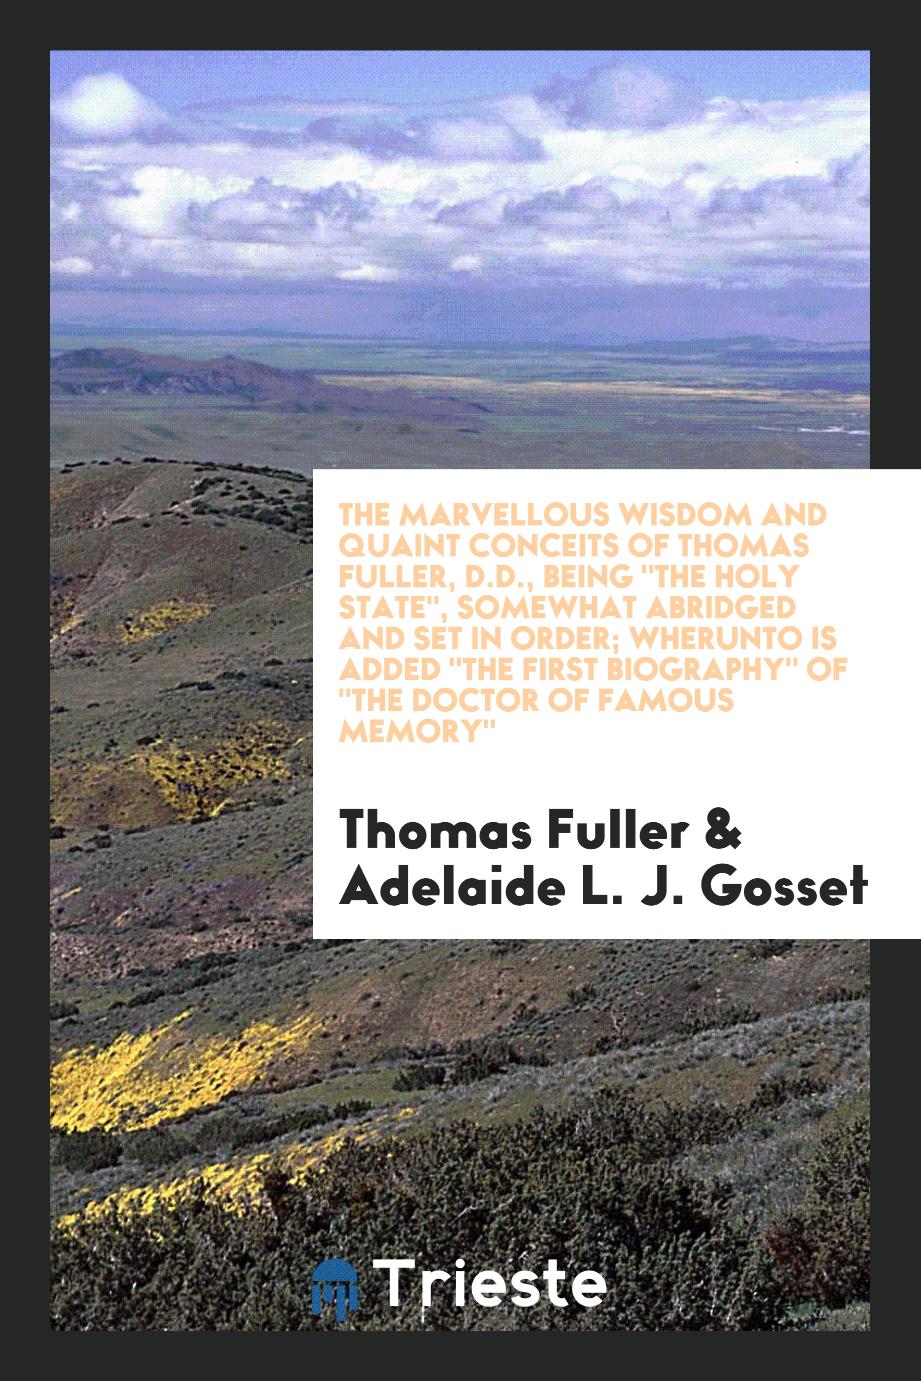 The marvellous wisdom and quaint conceits of Thomas Fuller, D.D., being "The holy state", somewhat abridged and set in order; wherunto is added "The first biography" of "The Doctor of famous memory"